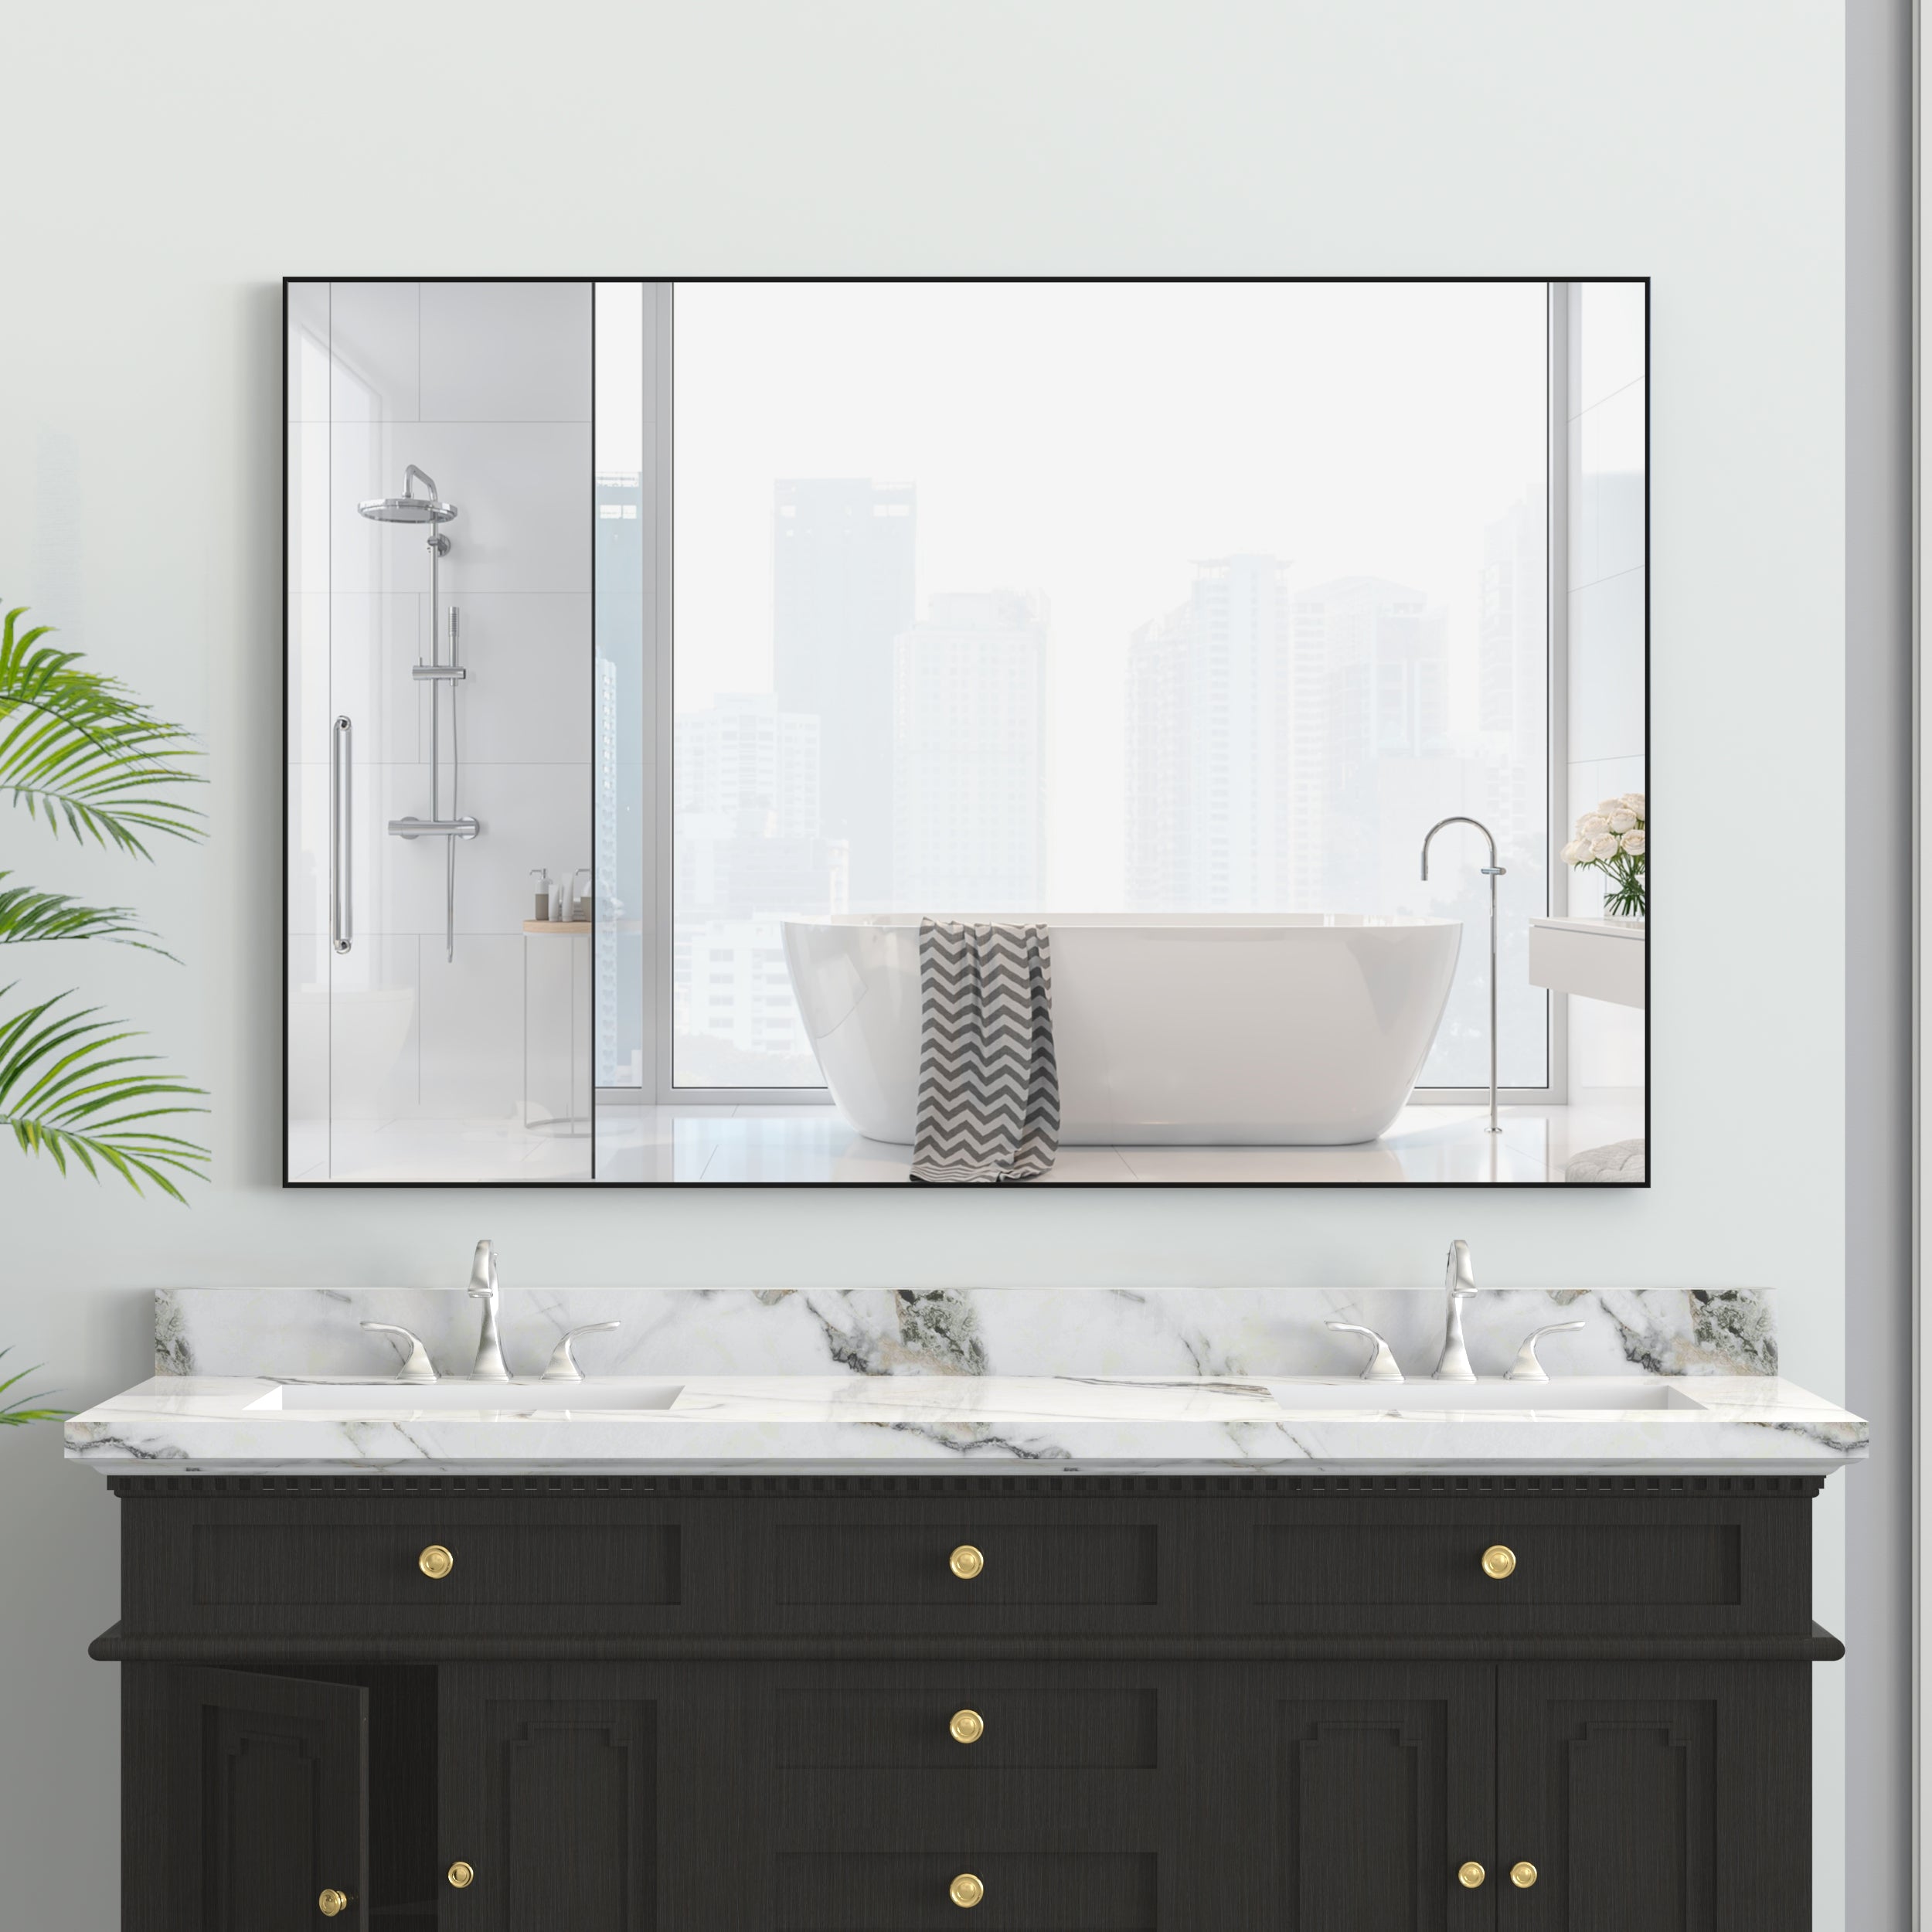 48"x32" Oversized Modern Rectangle Bathroom Mirror with Balck Frame Decorative Large Wall Mirrors for Bathroom Living Room Bedroom Vertical or Horizontal Wall Mounted mirror with Aluminum Frame